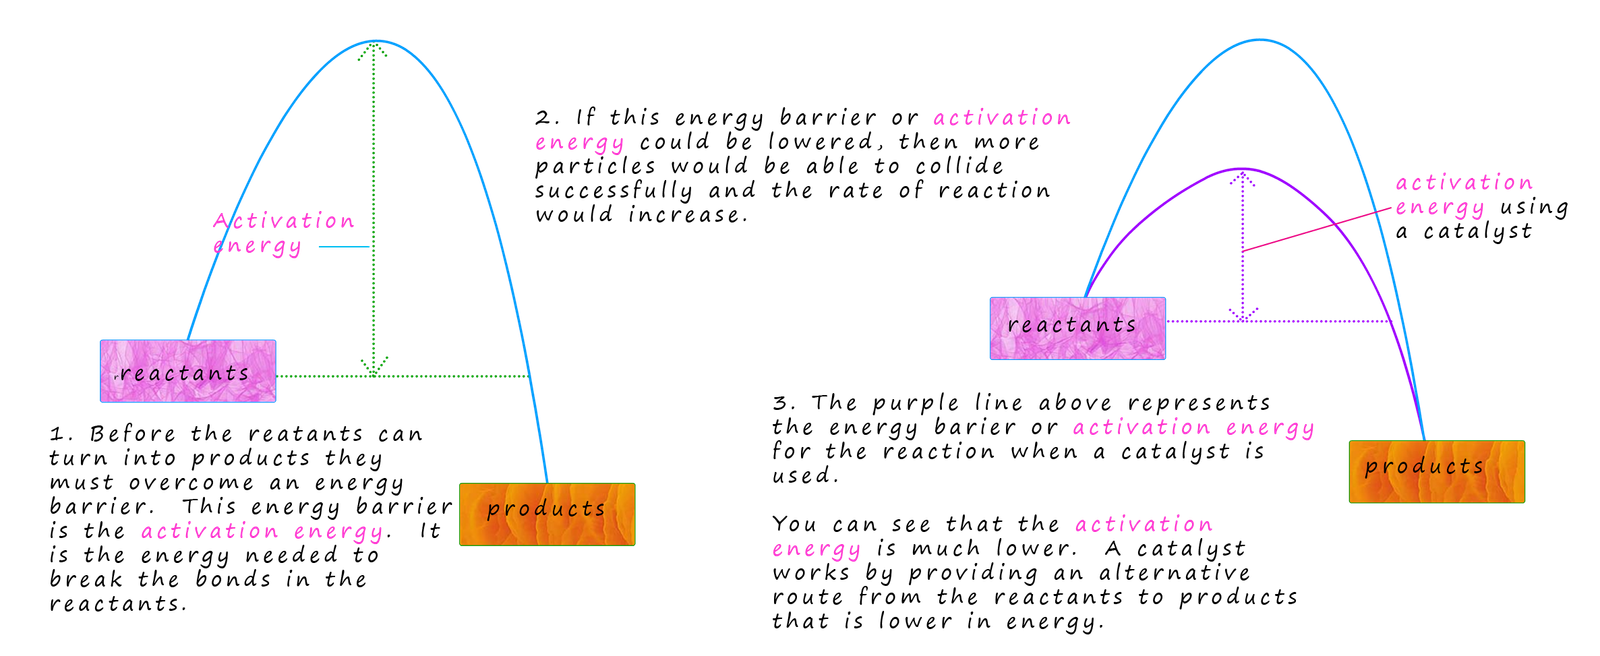 energy profile diagram for a catalysed reaction